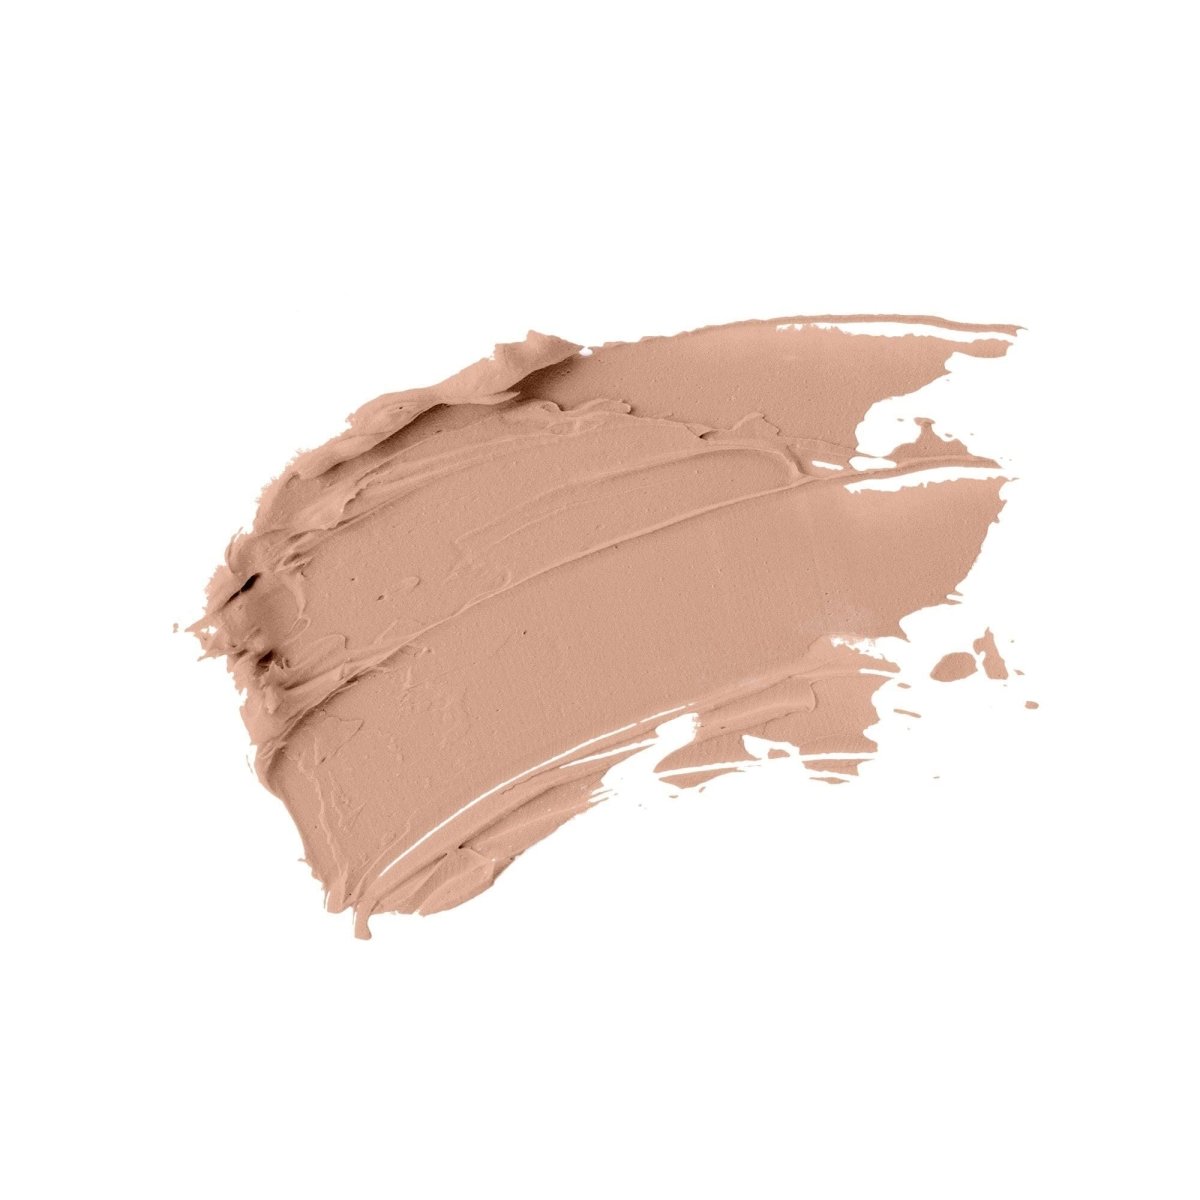 swatch of medium porcelain natural liquid foundation on a white background